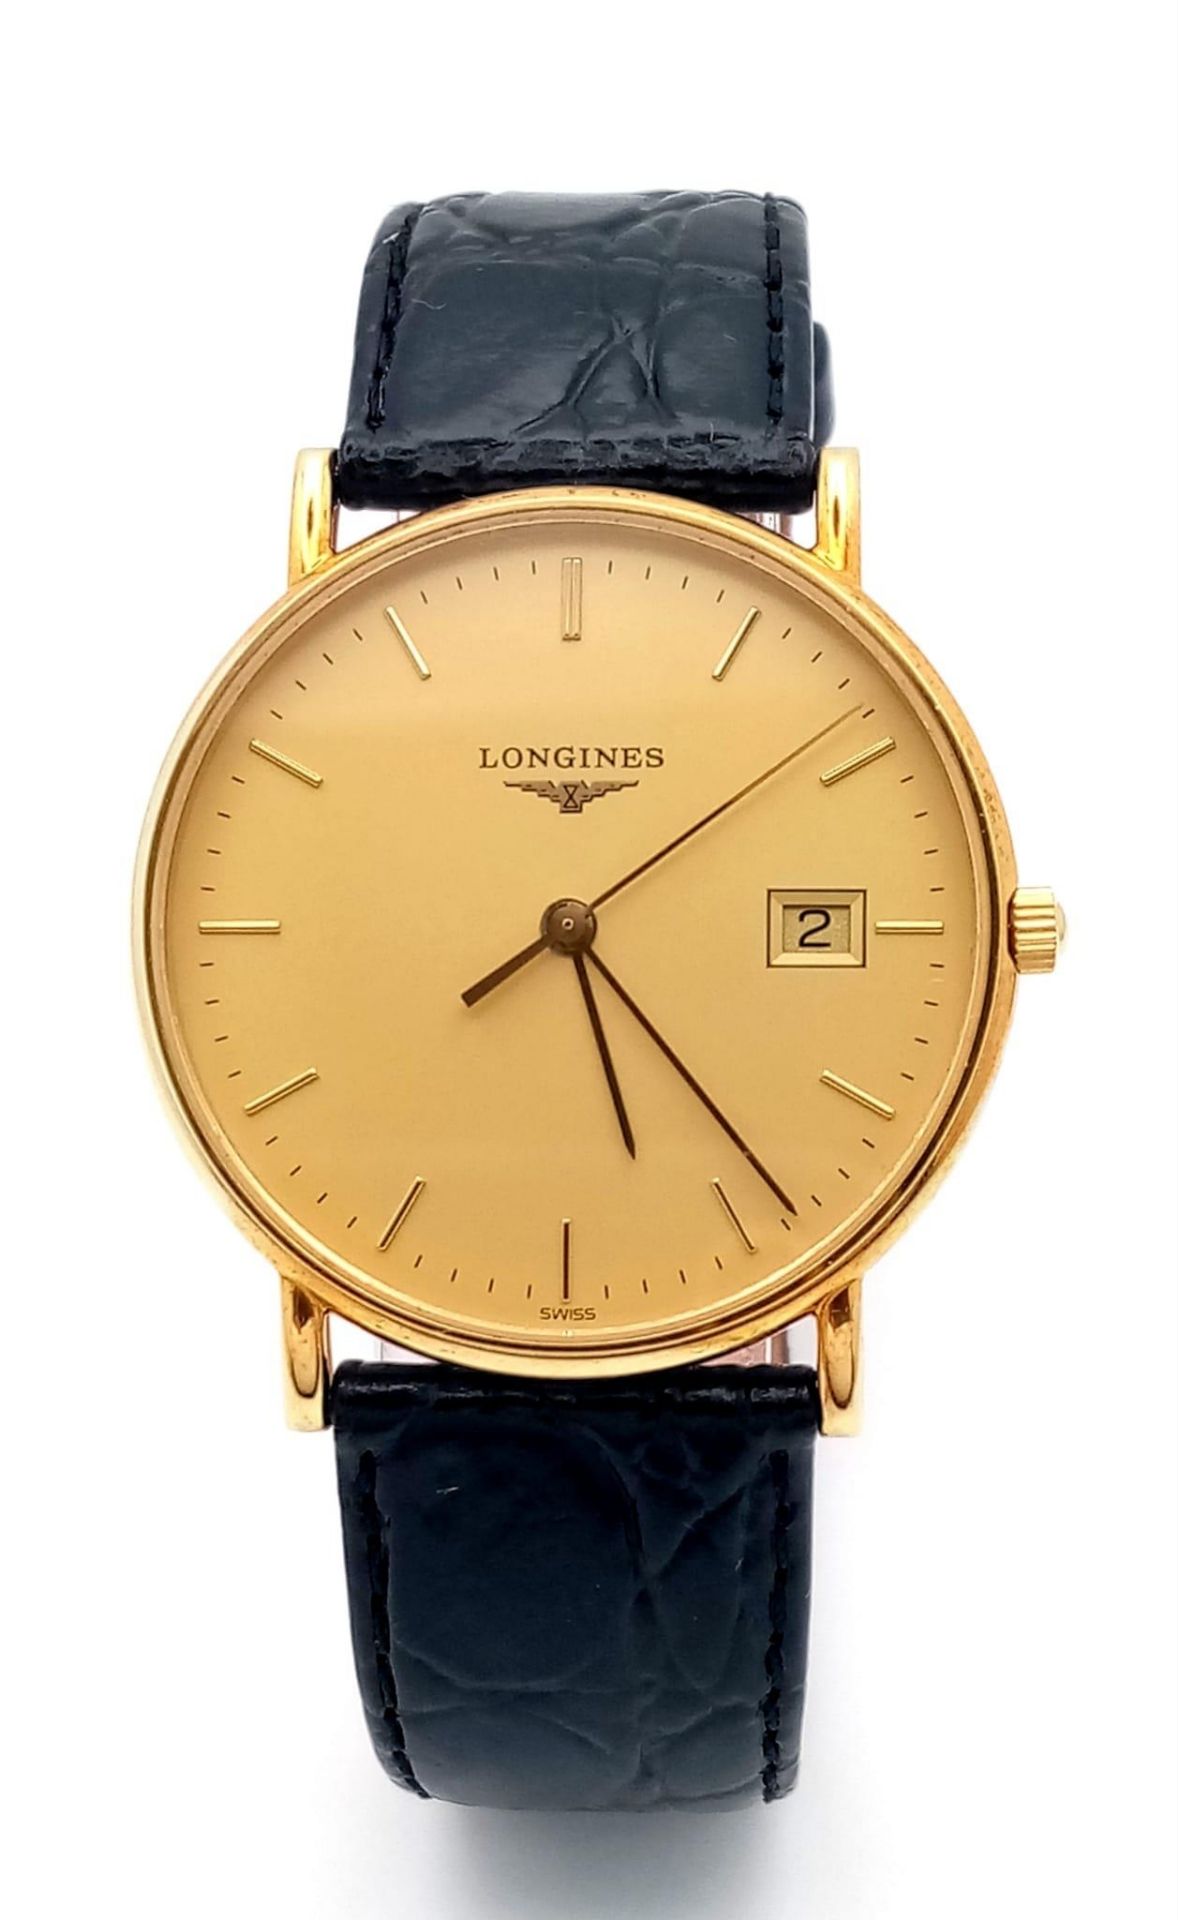 A Longine 18K Gold Cased Gents Watch. Black leather strap. 18k gold case - 33mm. Gilded dial with - Bild 4 aus 11